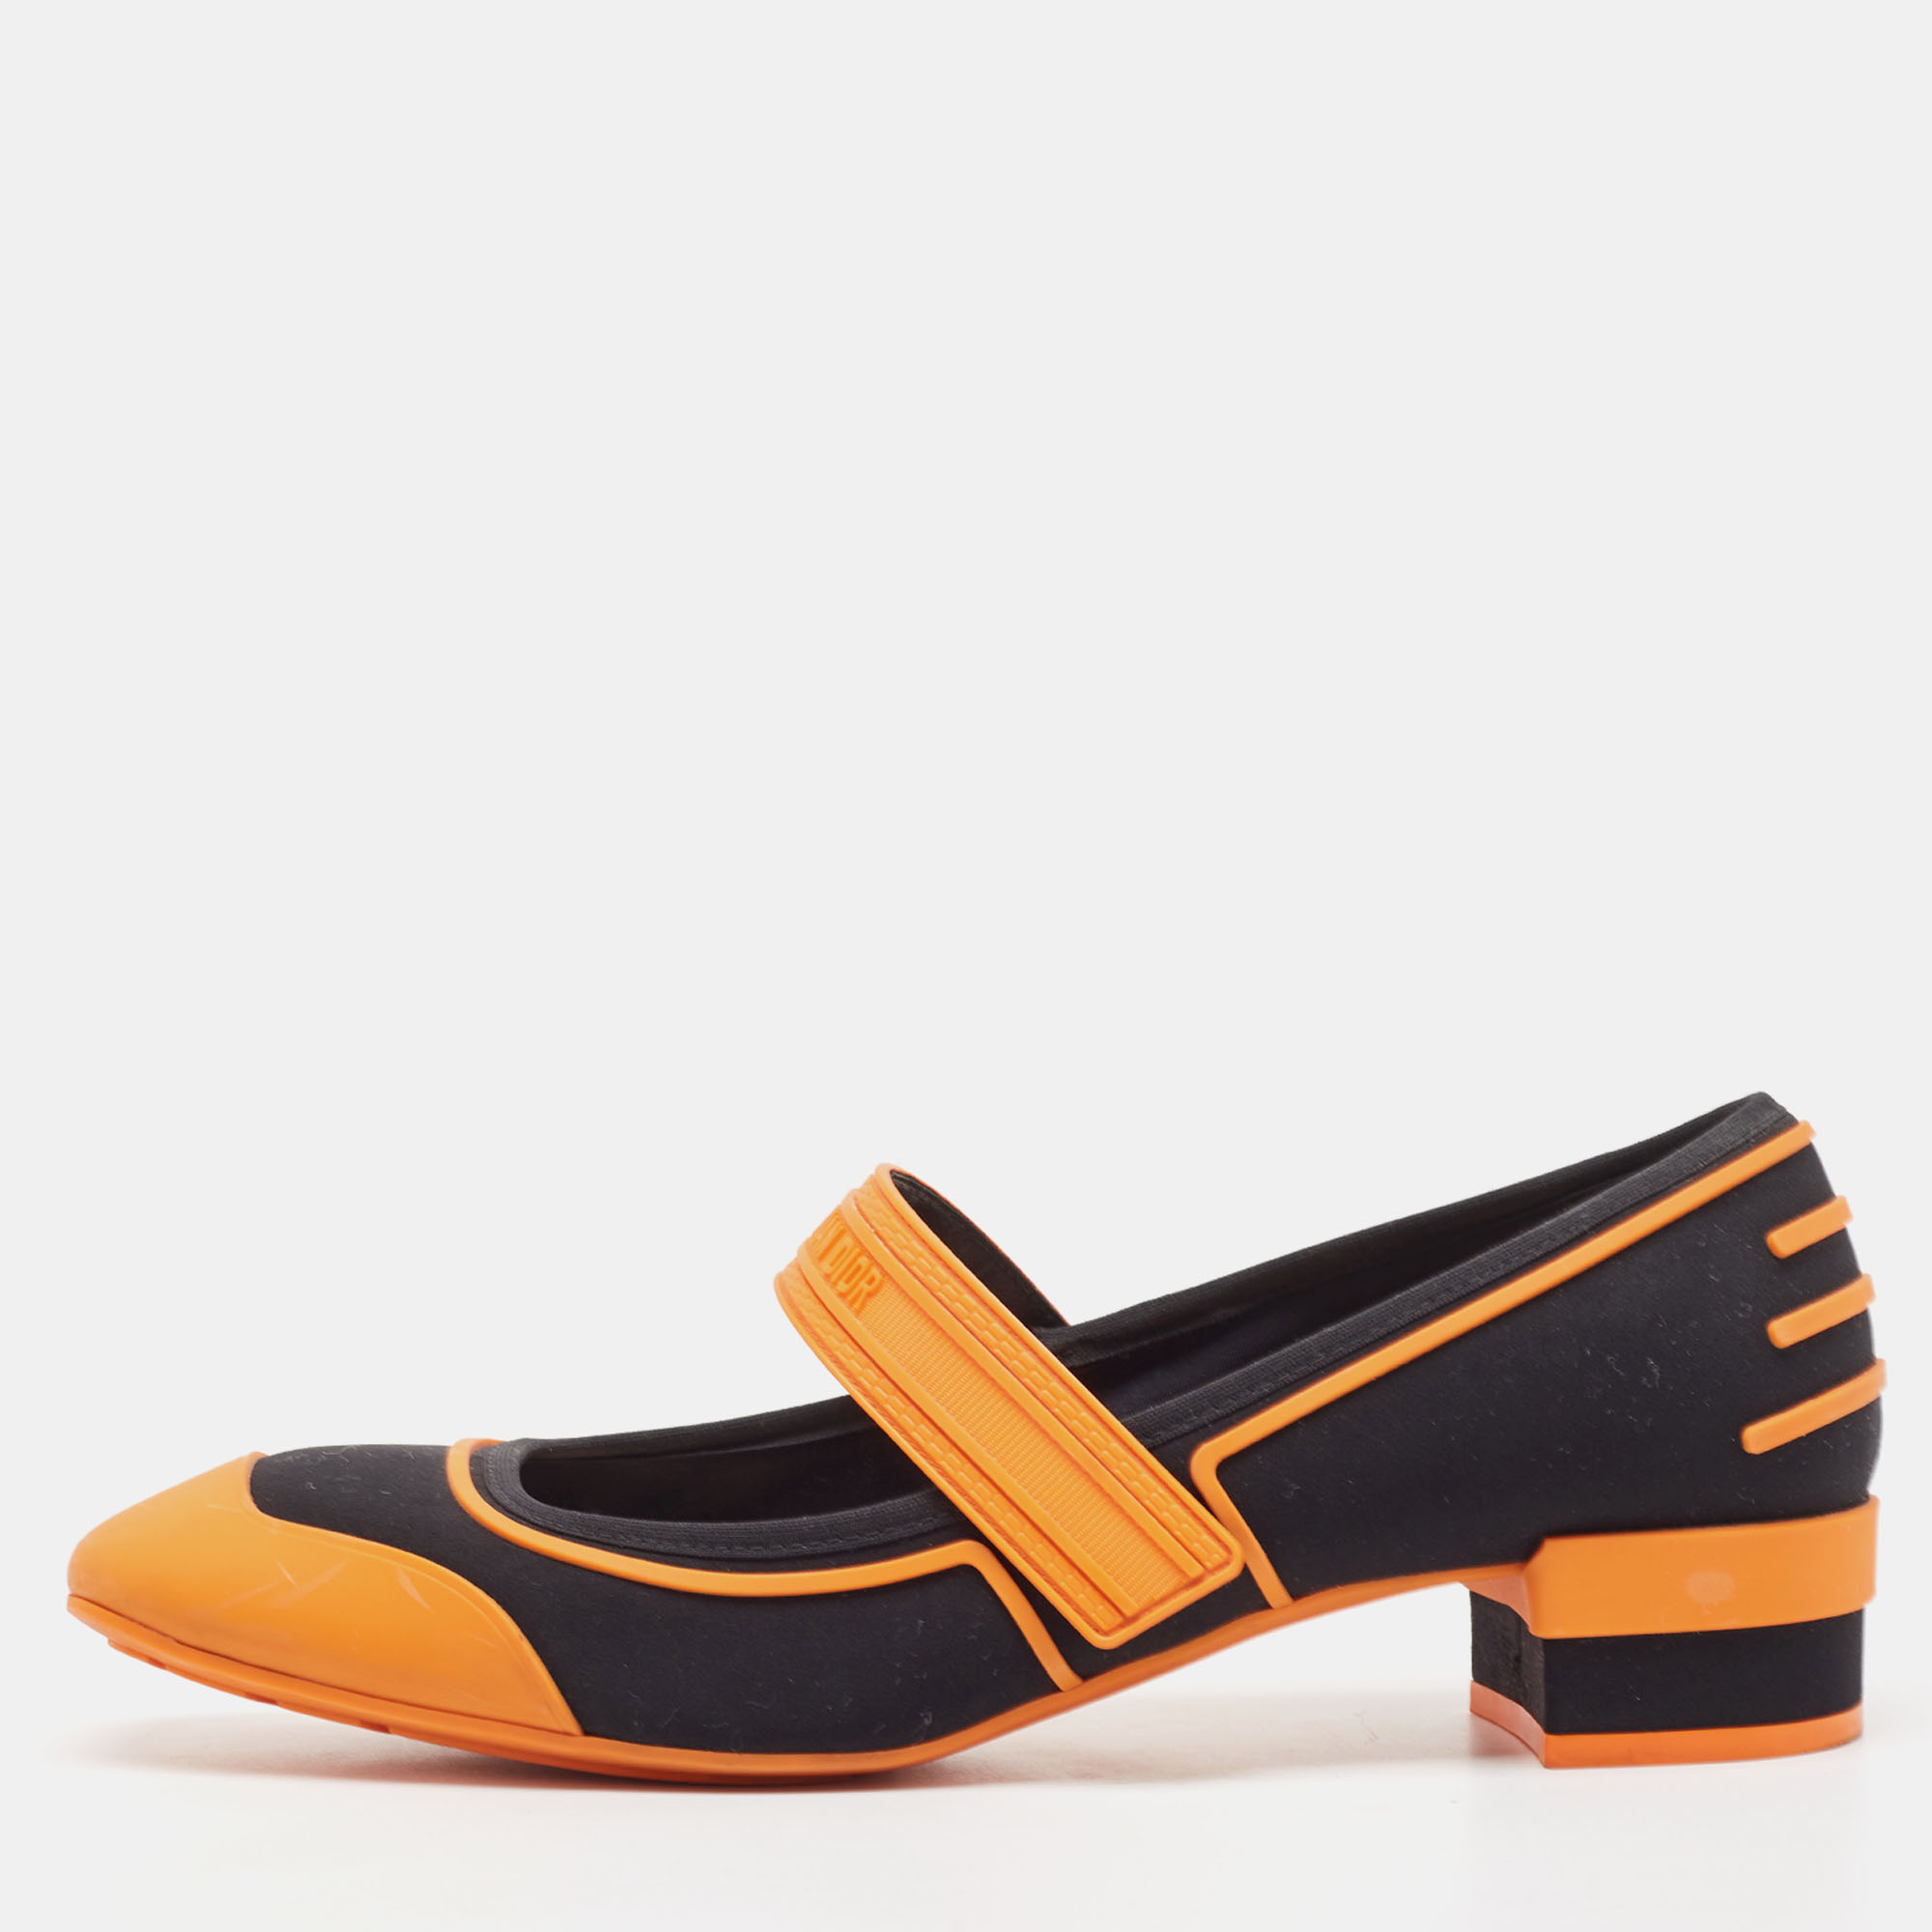 Dior Orange/Black Rubber And Fabric Roller Mary Jane Pumps Size 40